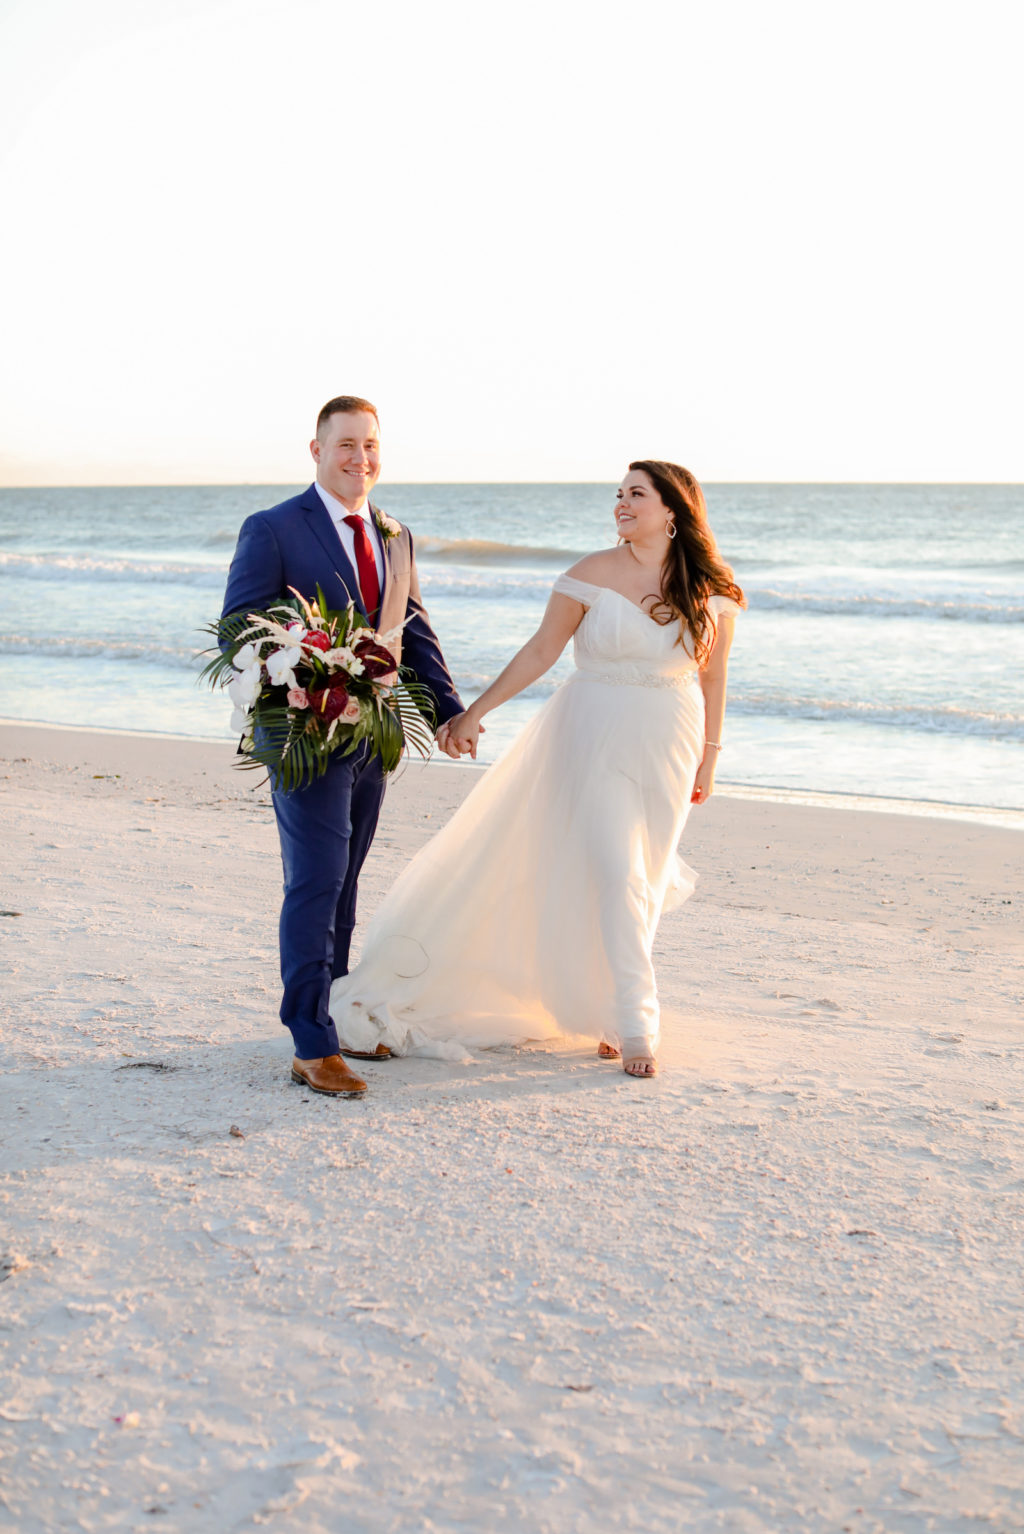 Florida Bride in Boho Off the Shoulder Tulle and Chantilly Lace Wedding Dress with Groom in Blue Suit Holding Bride's Tropical Floral Bouquet | Tampa Bay Wedding Photographer Lifelong Photography Studio | St. Pete Beach Wedding Venue Postcard Inn | Wedding Florist Iza's Flowers